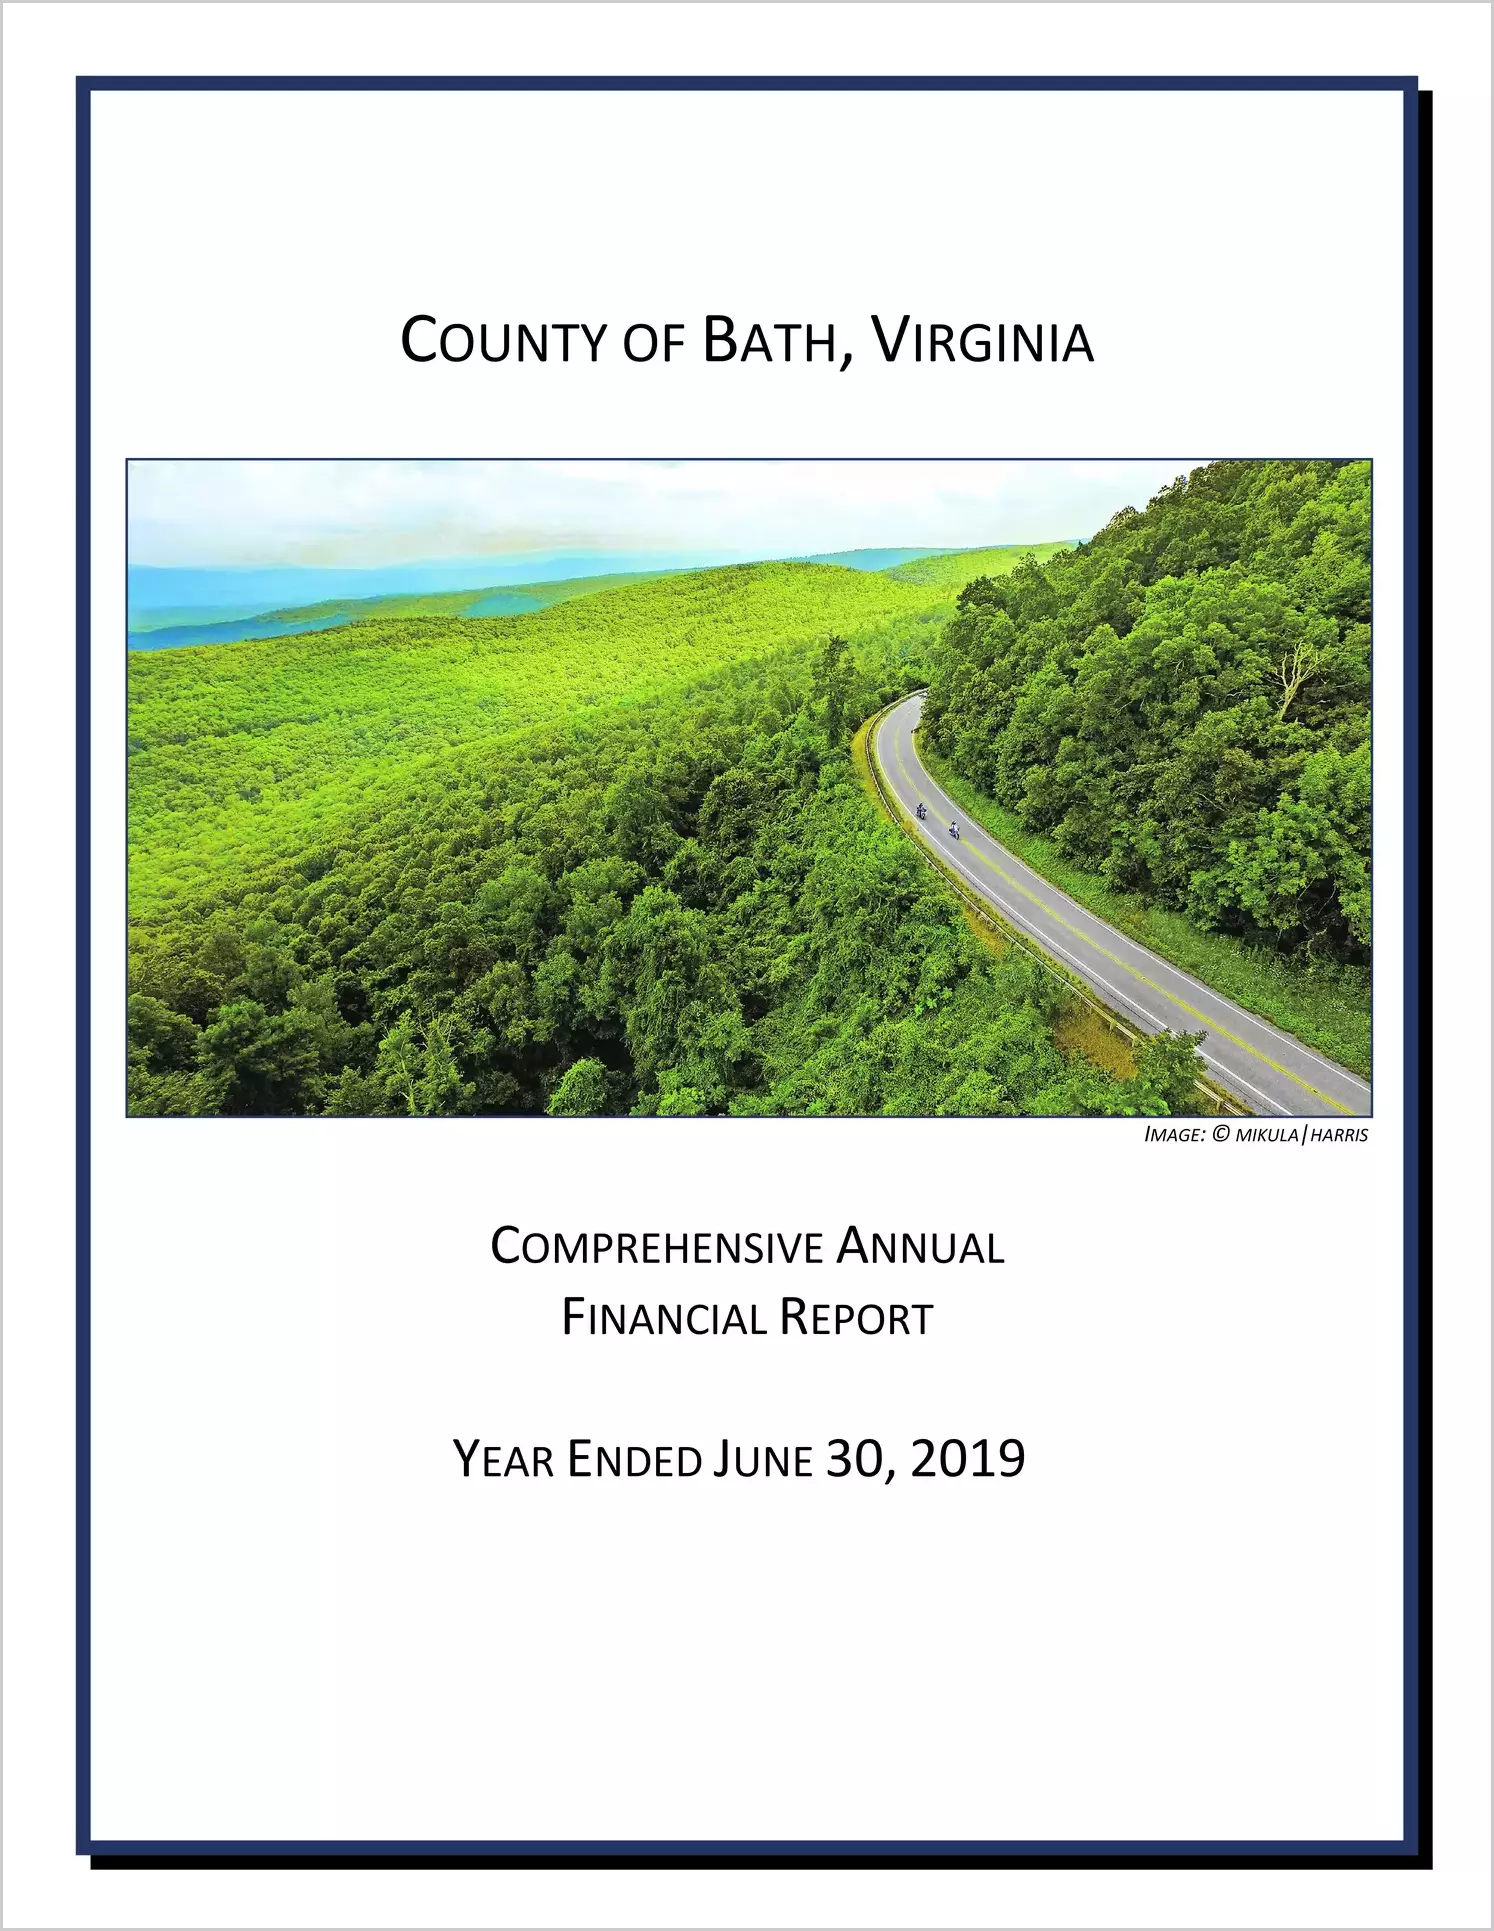 2019 Annual Financial Report for County of Bath